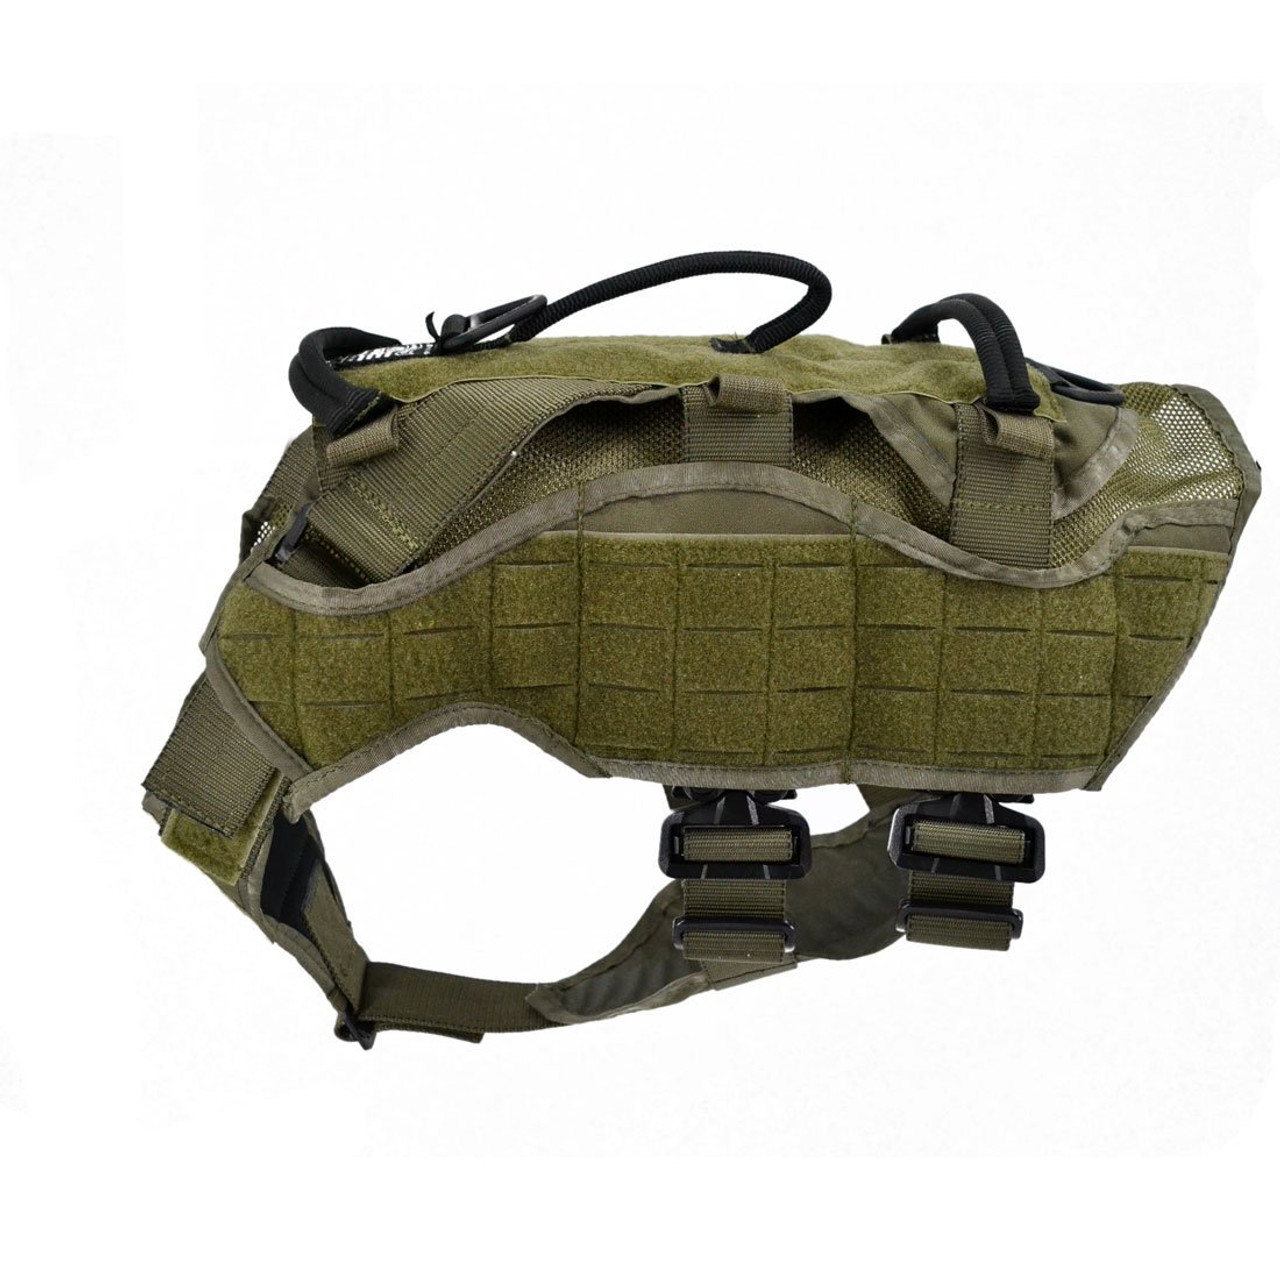 Fields Light Weight Patrol Chest Rig Harness Airsoft Vest